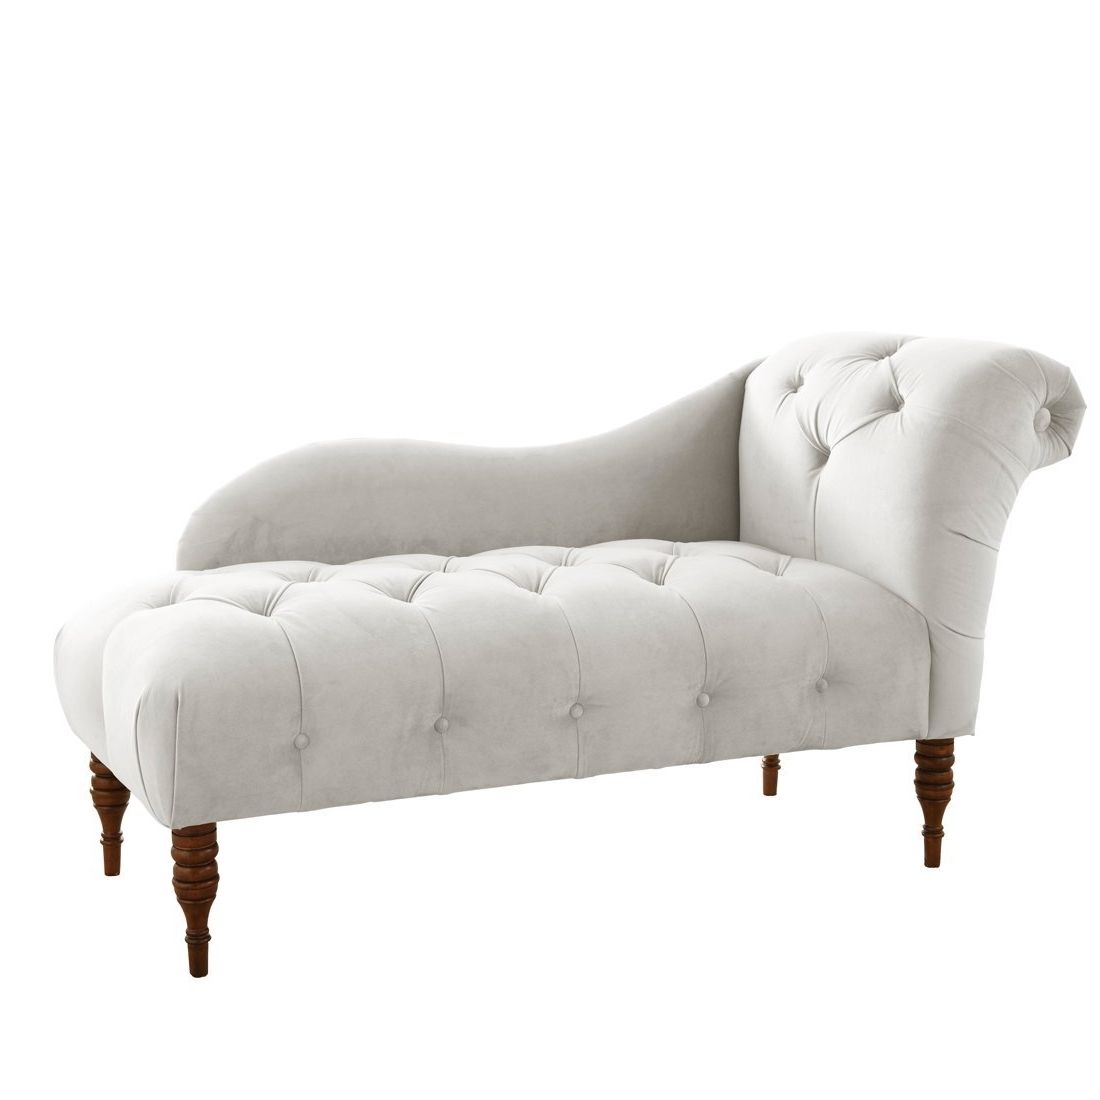 Preferred Amazon: Skyline Furniture Tufted Fainting Sofa, Velvet White Throughout Sofas With Chaise Lounge (View 12 of 15)